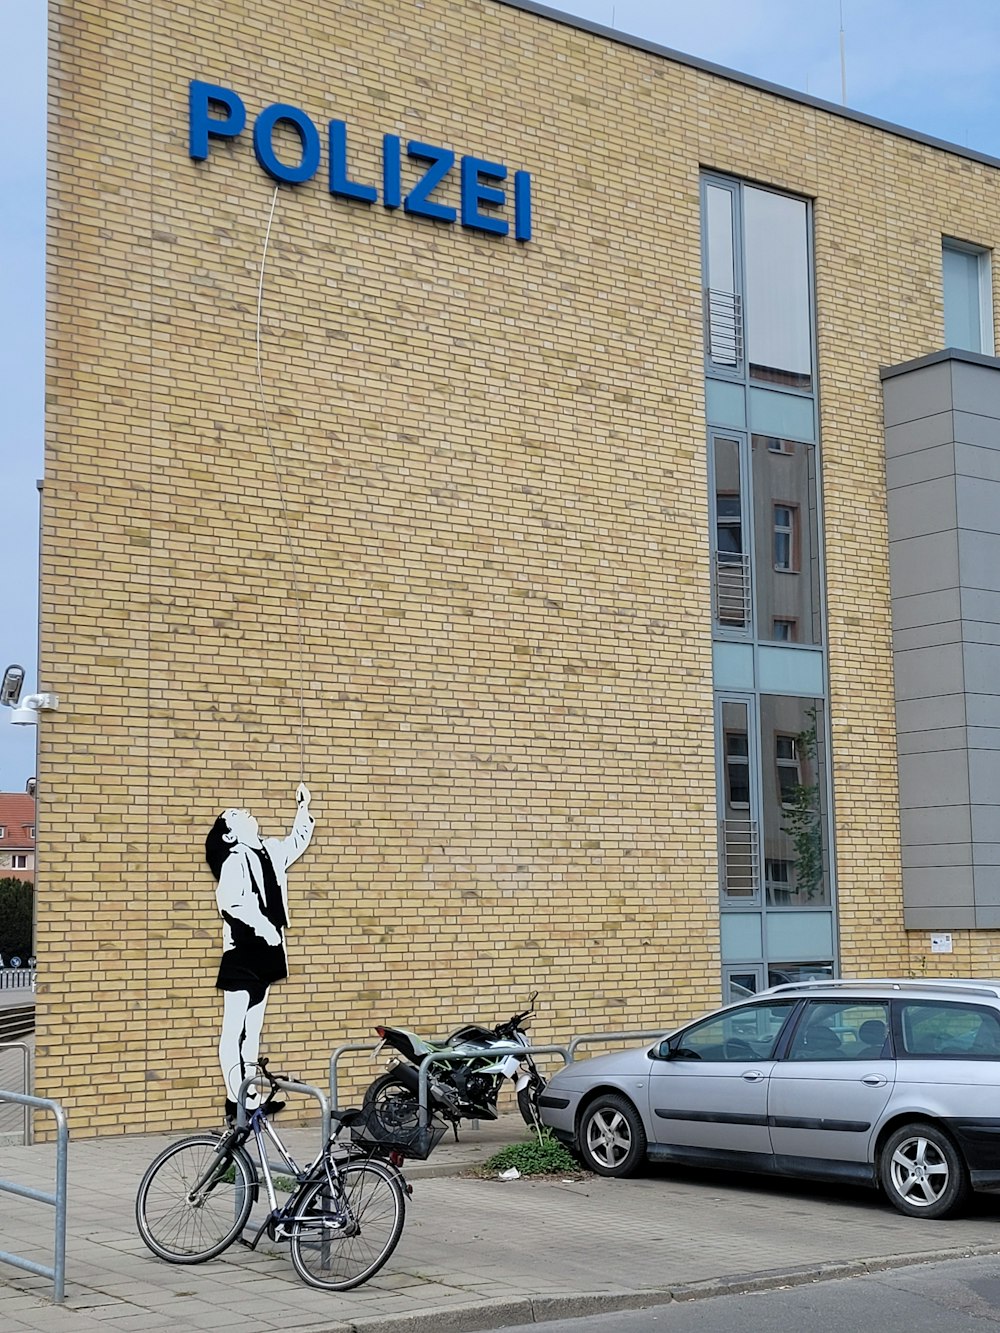 a person on a bicycle in front of a building